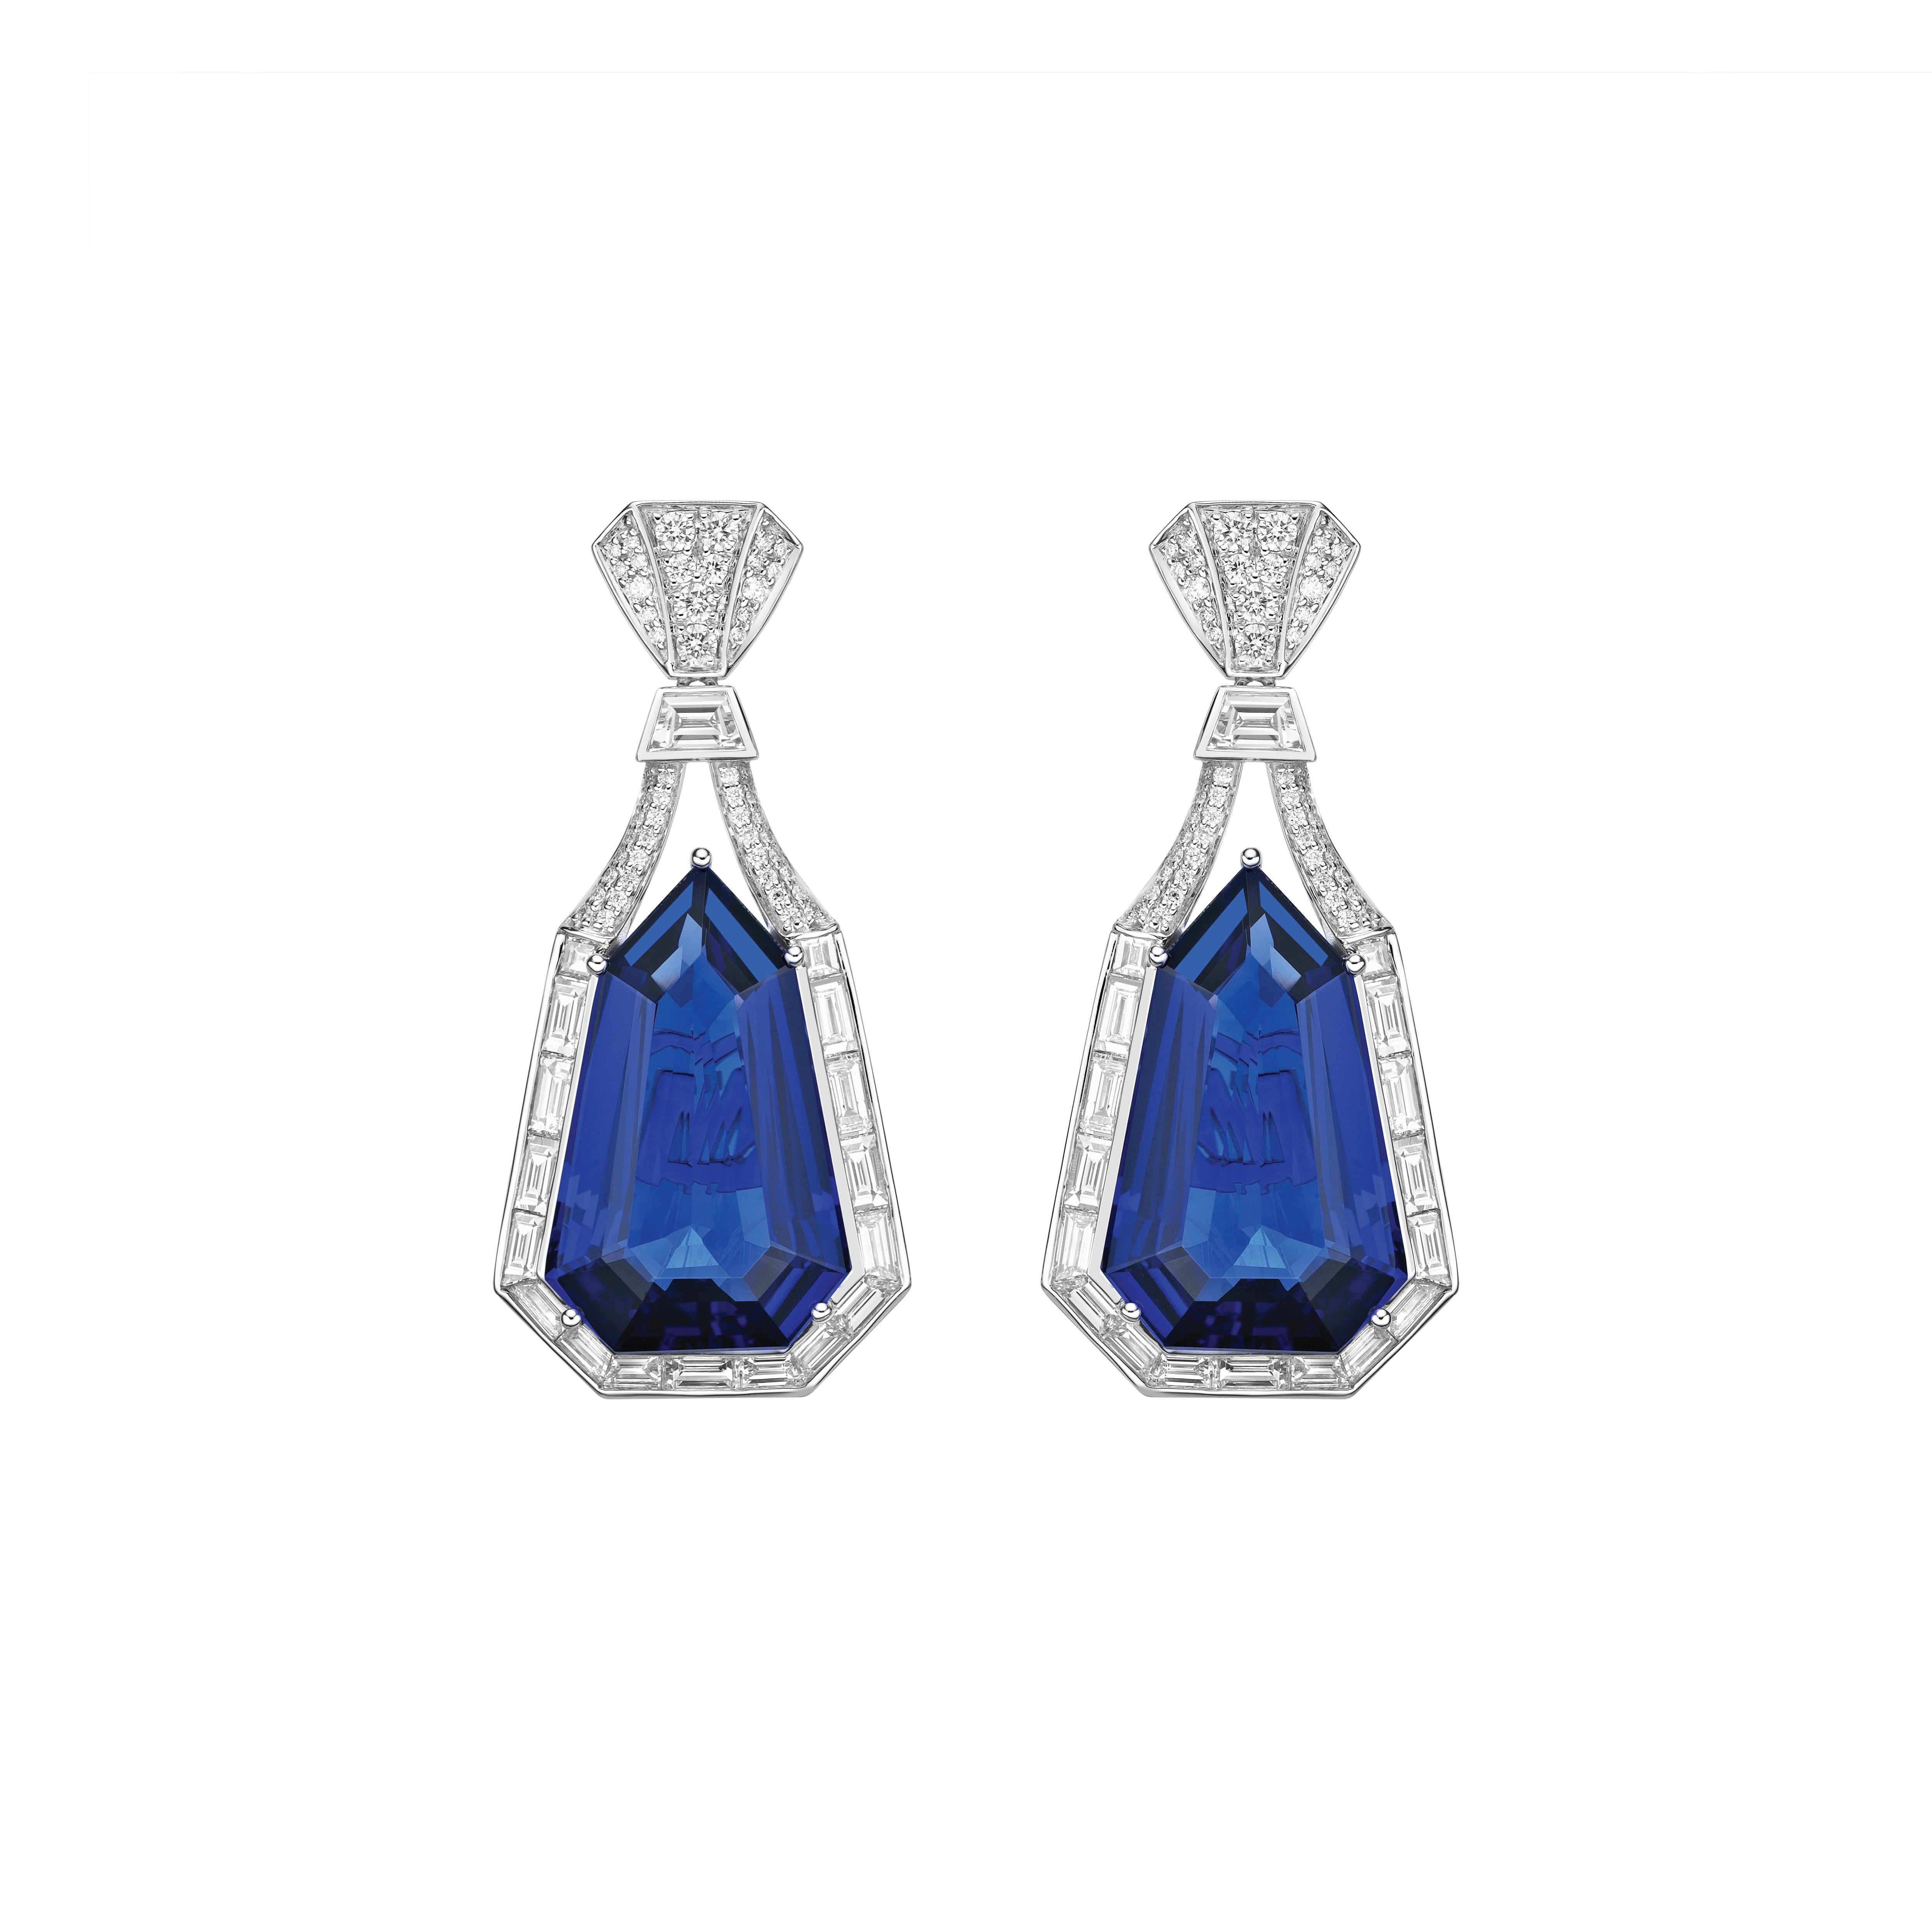 Contemporary 41.53 Carat Tanzanite Drop Earrings in 18Karat White Gold with Diamond. For Sale